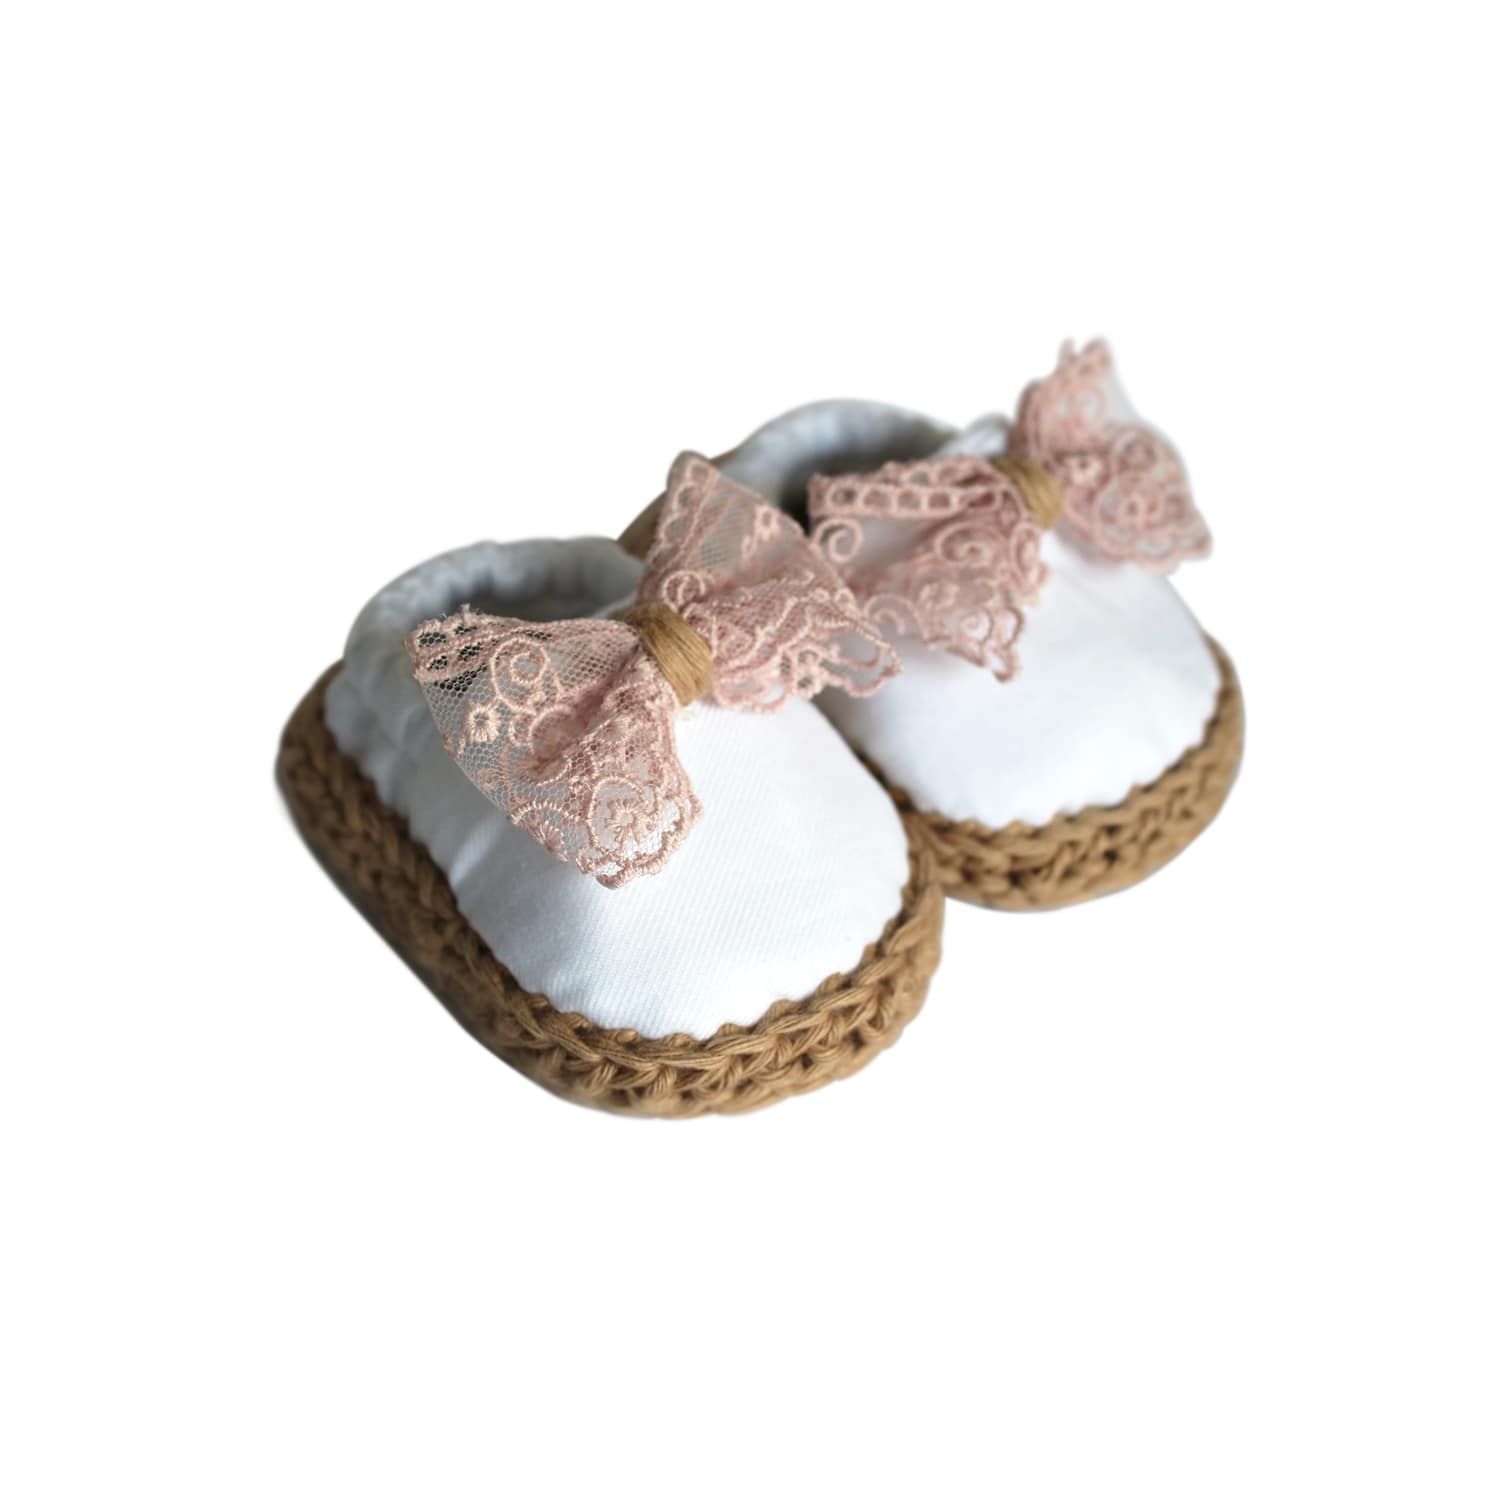 Baby shoes for girls in white with lace bow and flexible woven sole